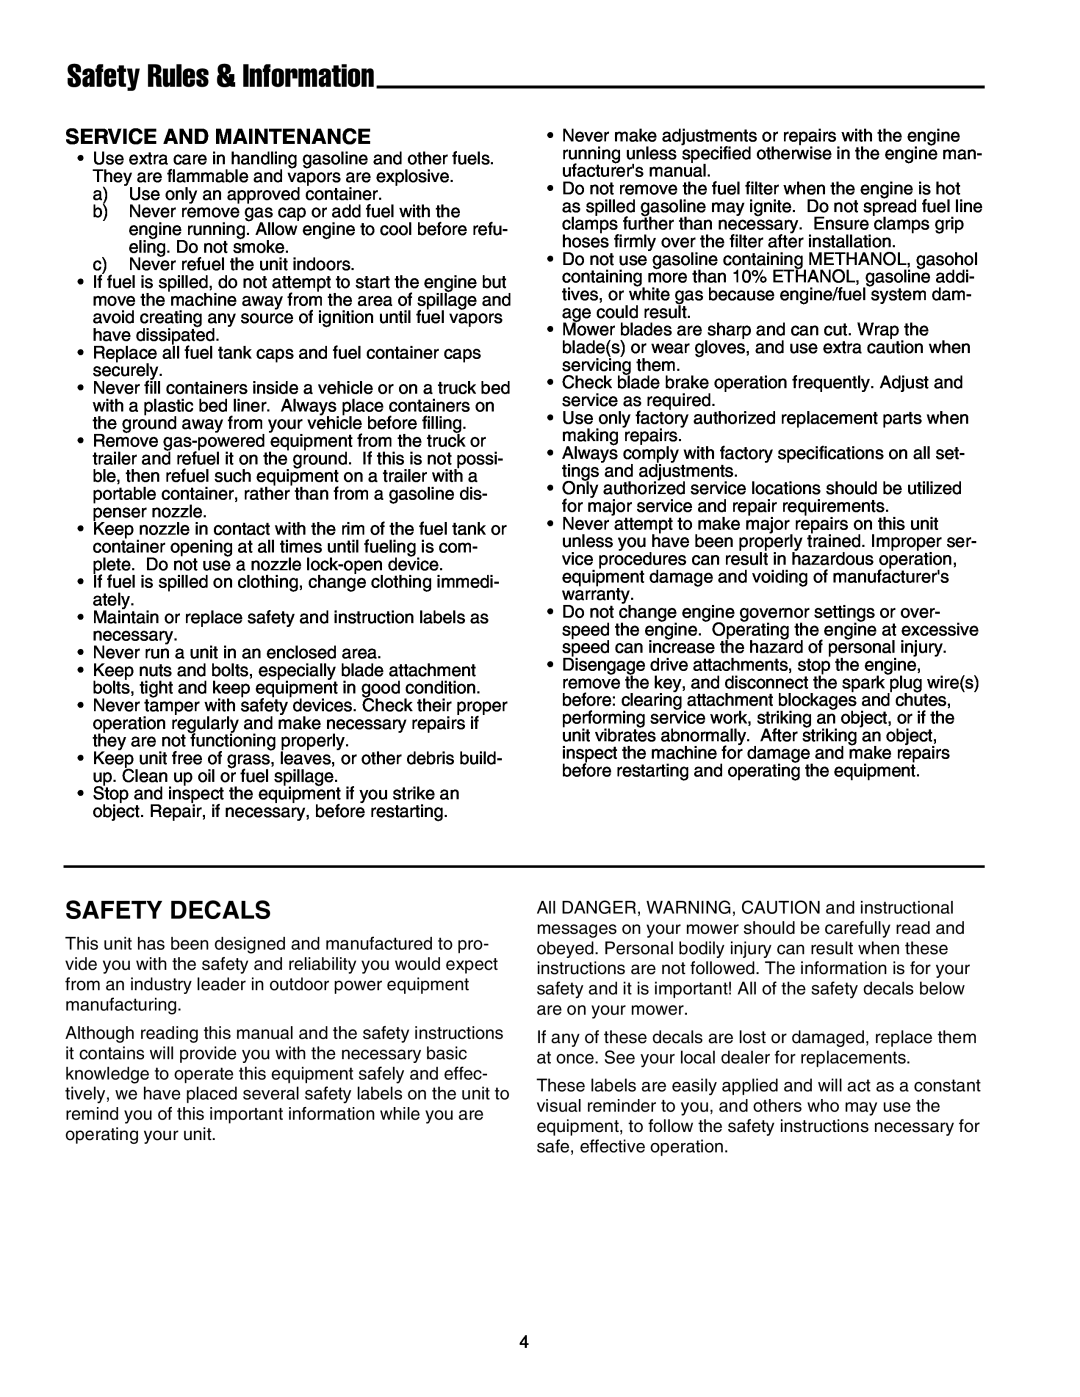 Snapper FB13250BS, GM2515KAW, GM2513H manual Safety Rules & Information, Safety Decals, Service And Maintenance 